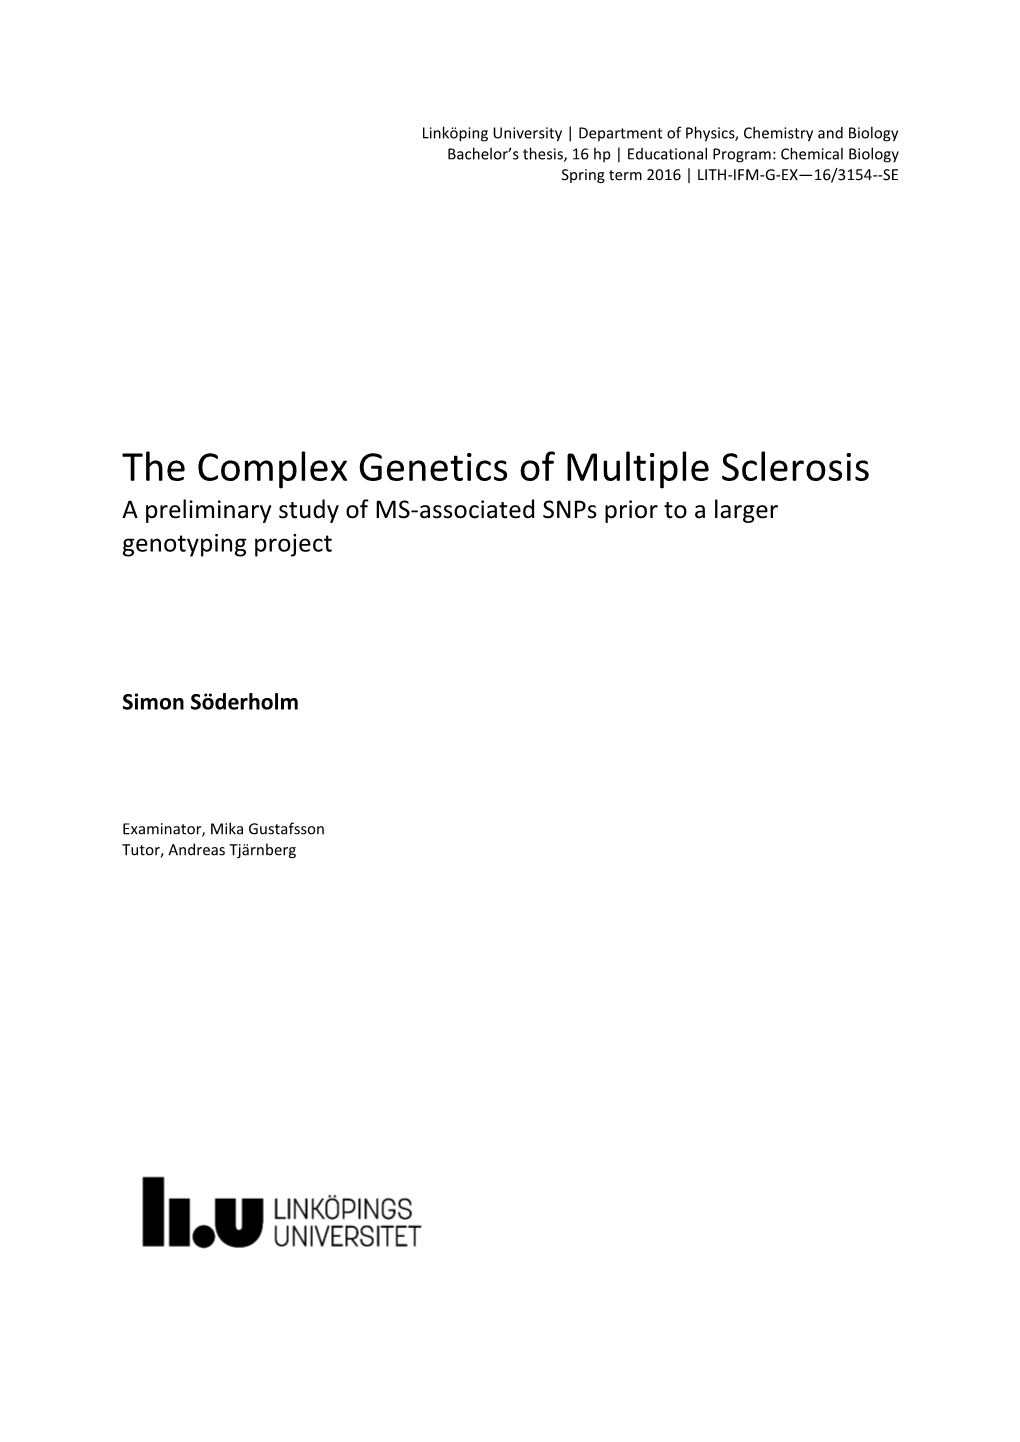 The Complex Genetics of Multiple Sclerosis a Preliminary Study of MS-Associated Snps Prior to a Larger Genotyping Project